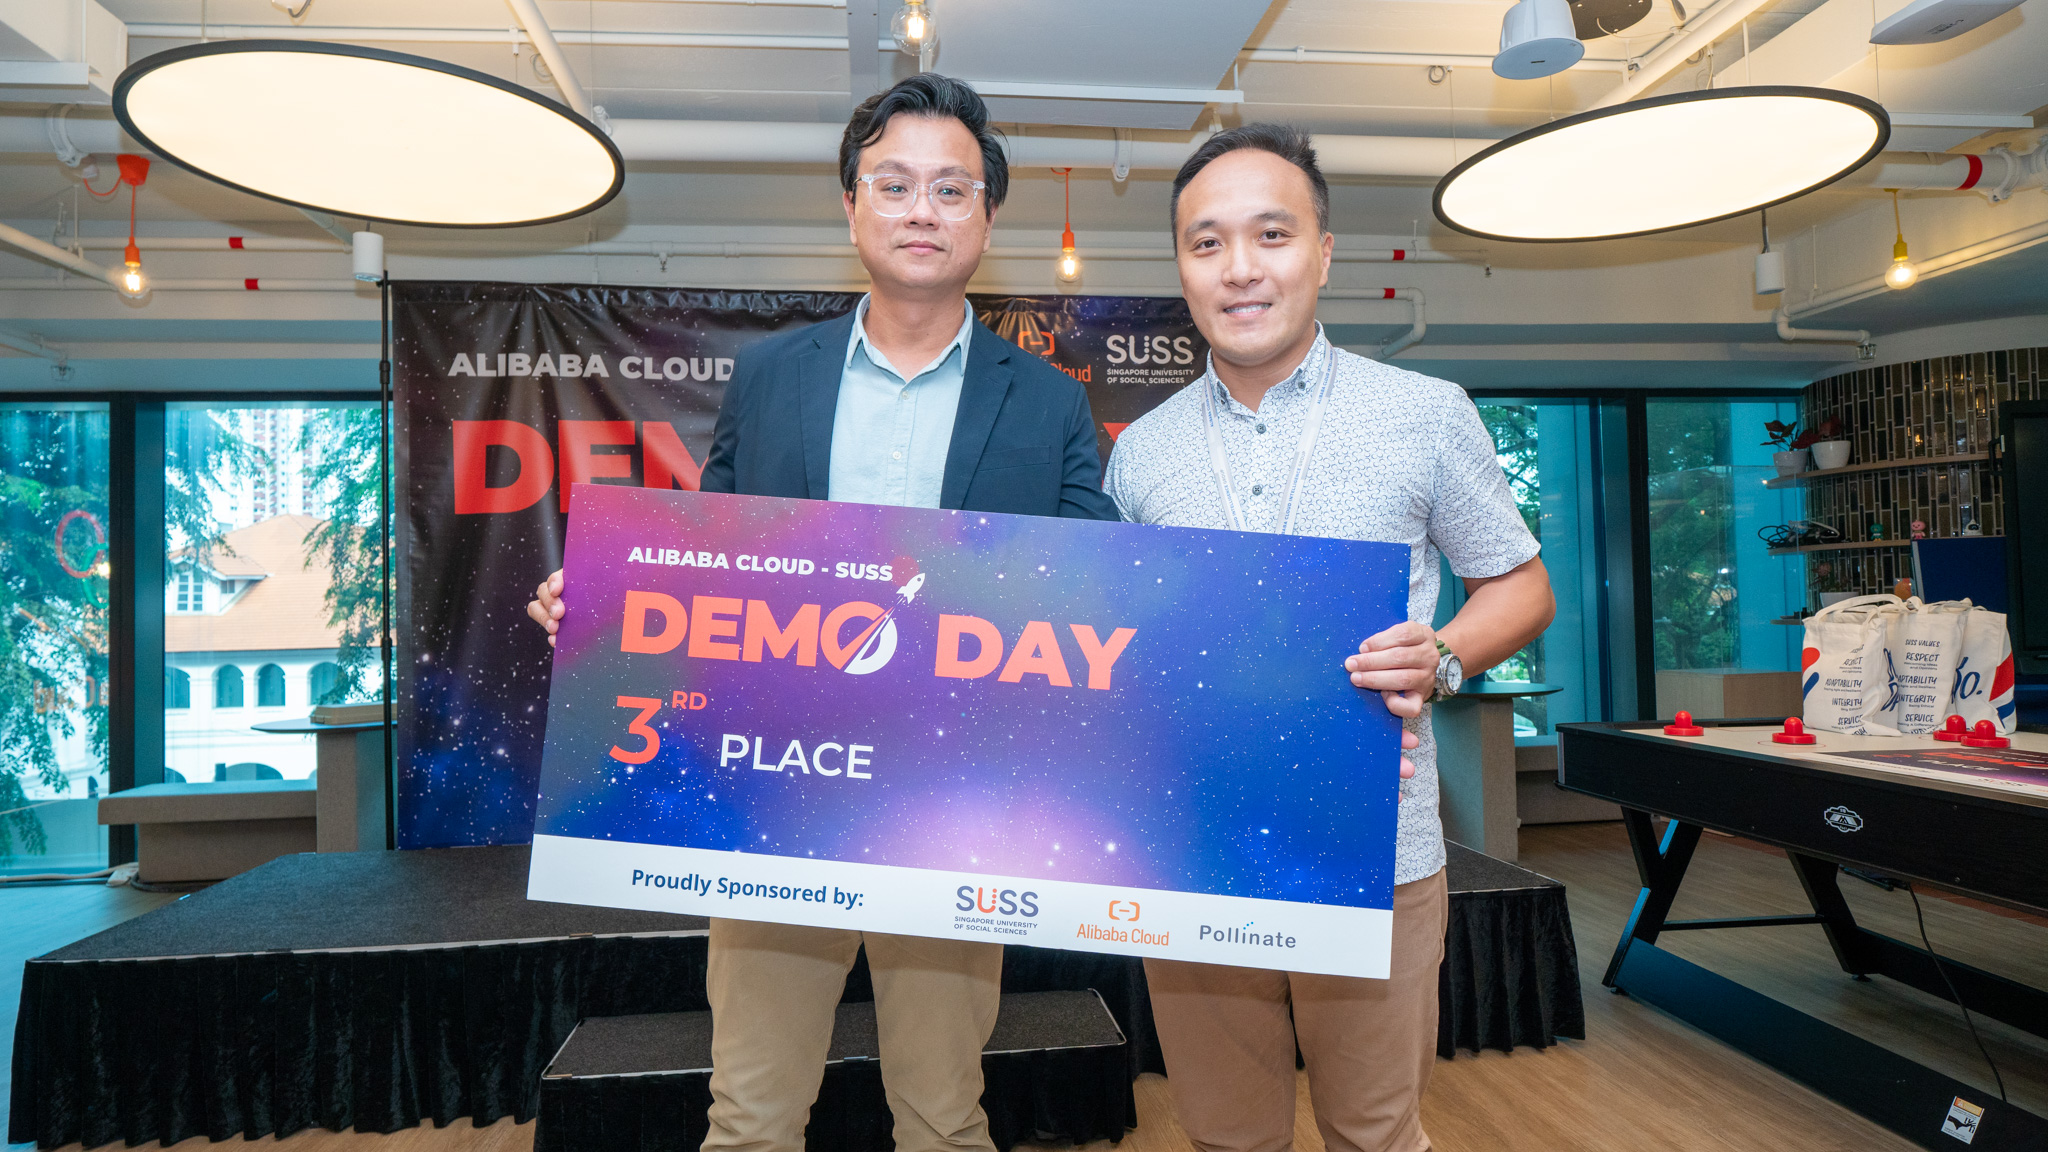 Second runner-up of Alibaba Cloud-SUSS Demo Day, World Coaches Academy, with Chris Tan, Director of Sales and Business Development at Alibaba Cloud.